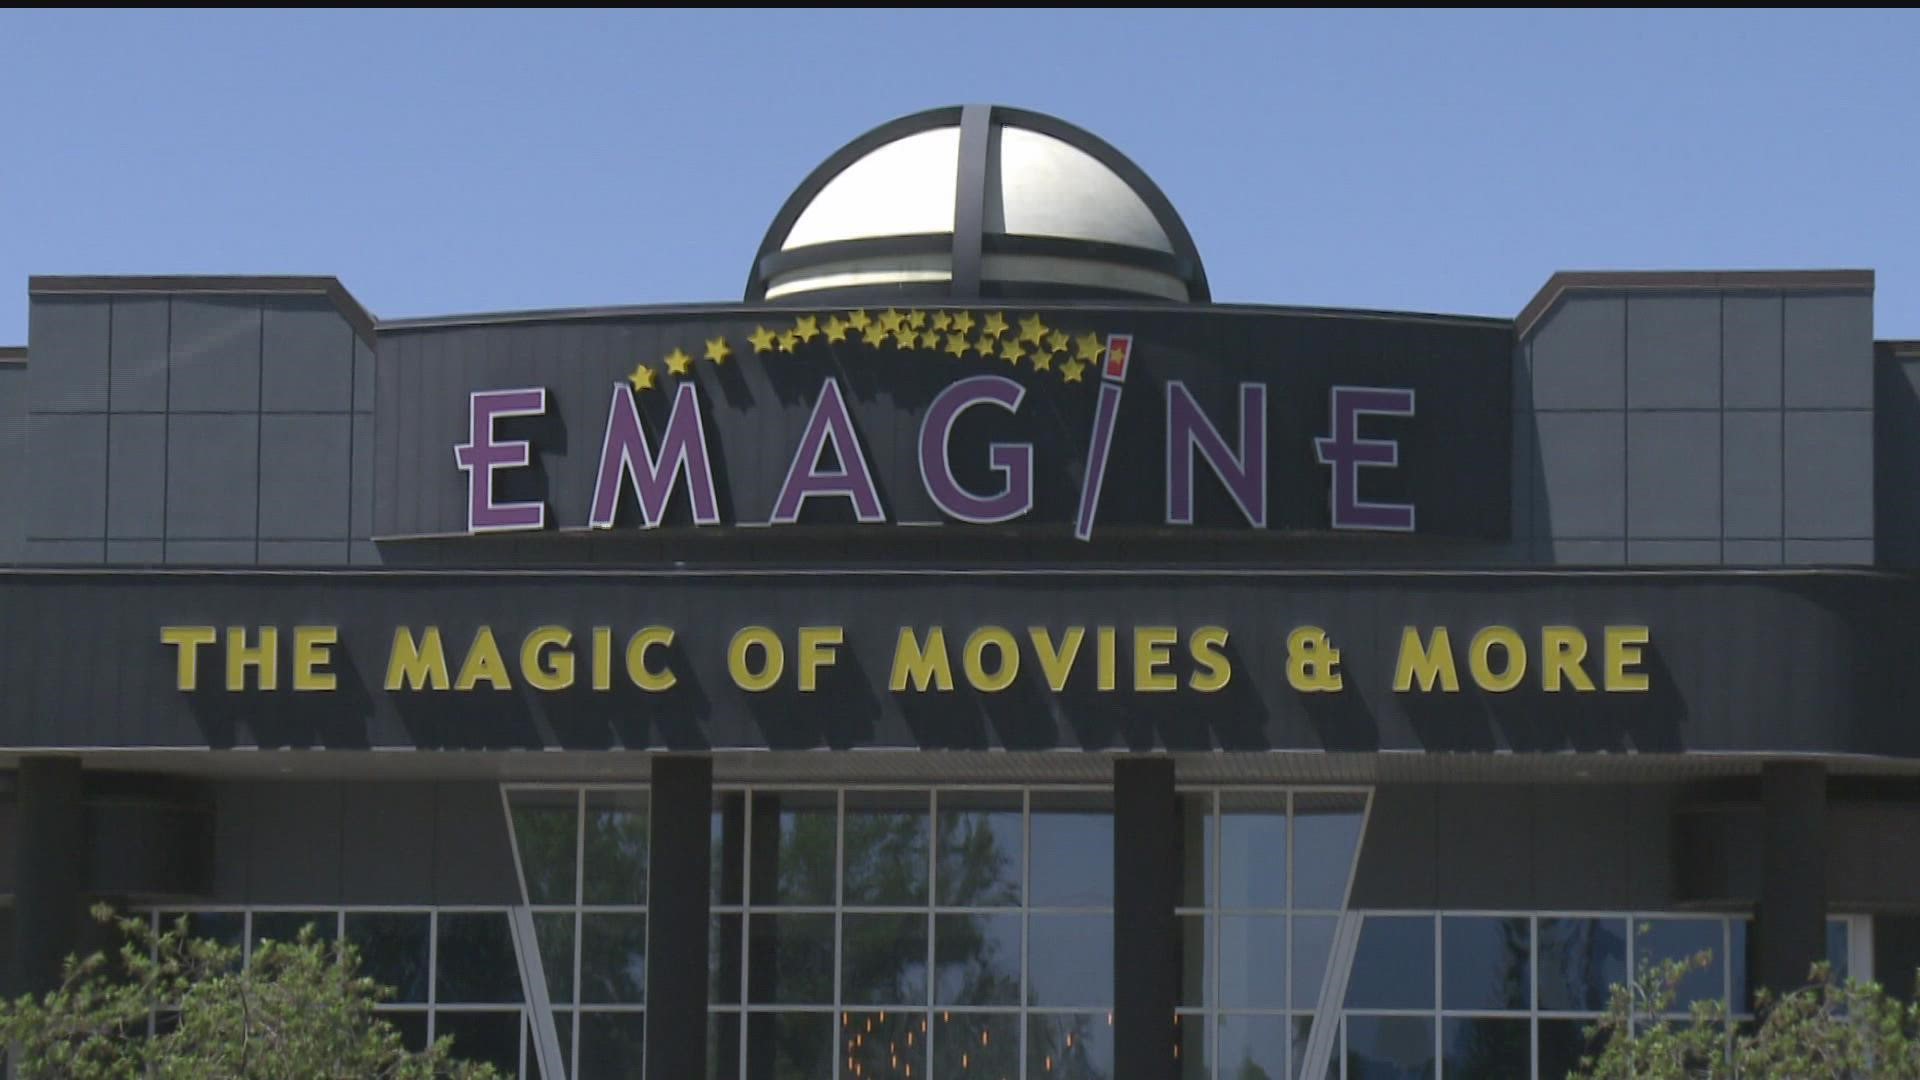 Through the end of June, Emagine theaters in Eagan and Plymouth will play movies starring Black actors and filmmakers, celebrating Black culture and achievement.